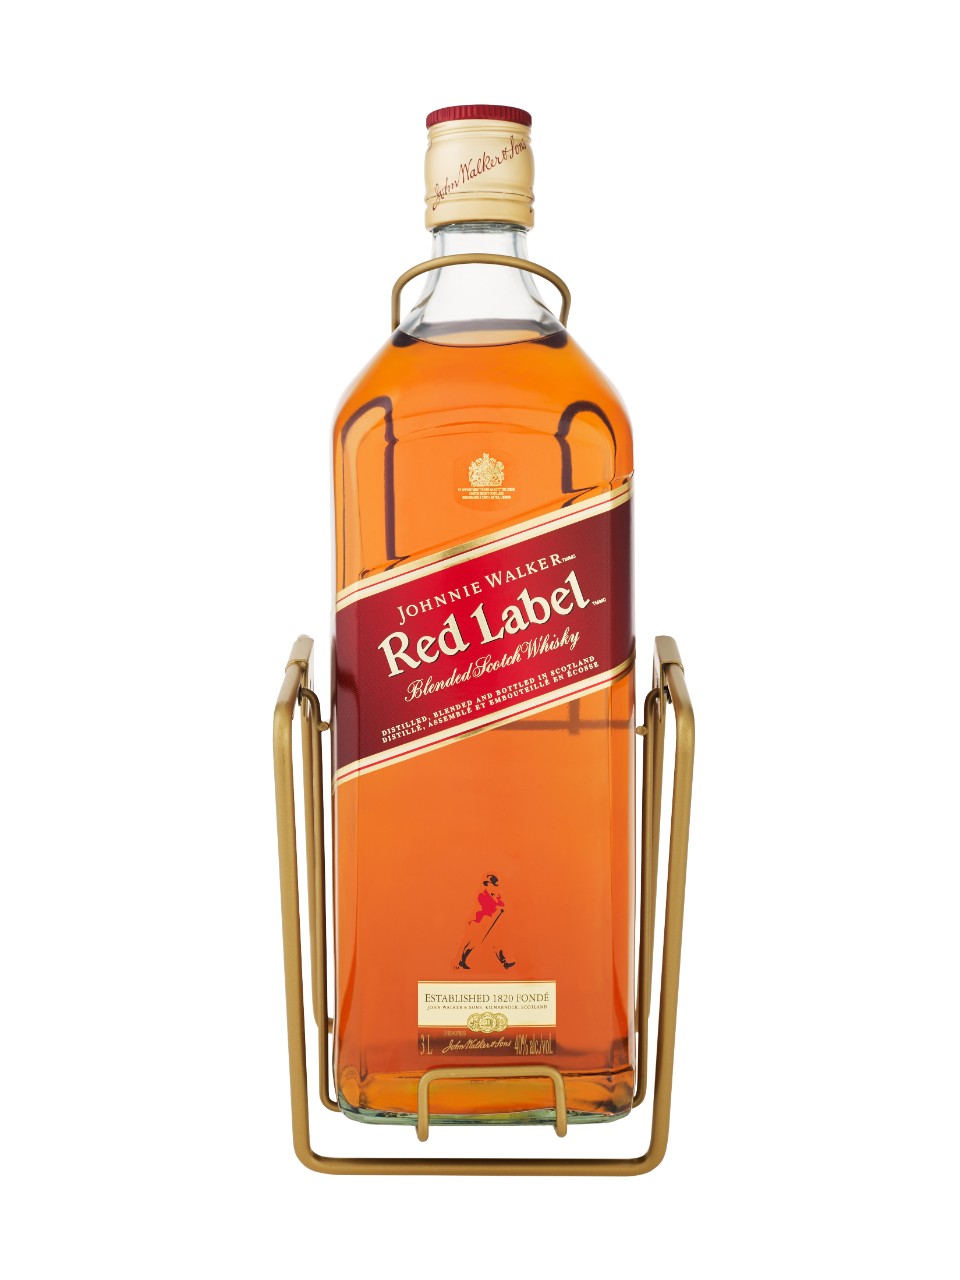 Johnnie Walker Red Label Scotch Whisky Lcbo